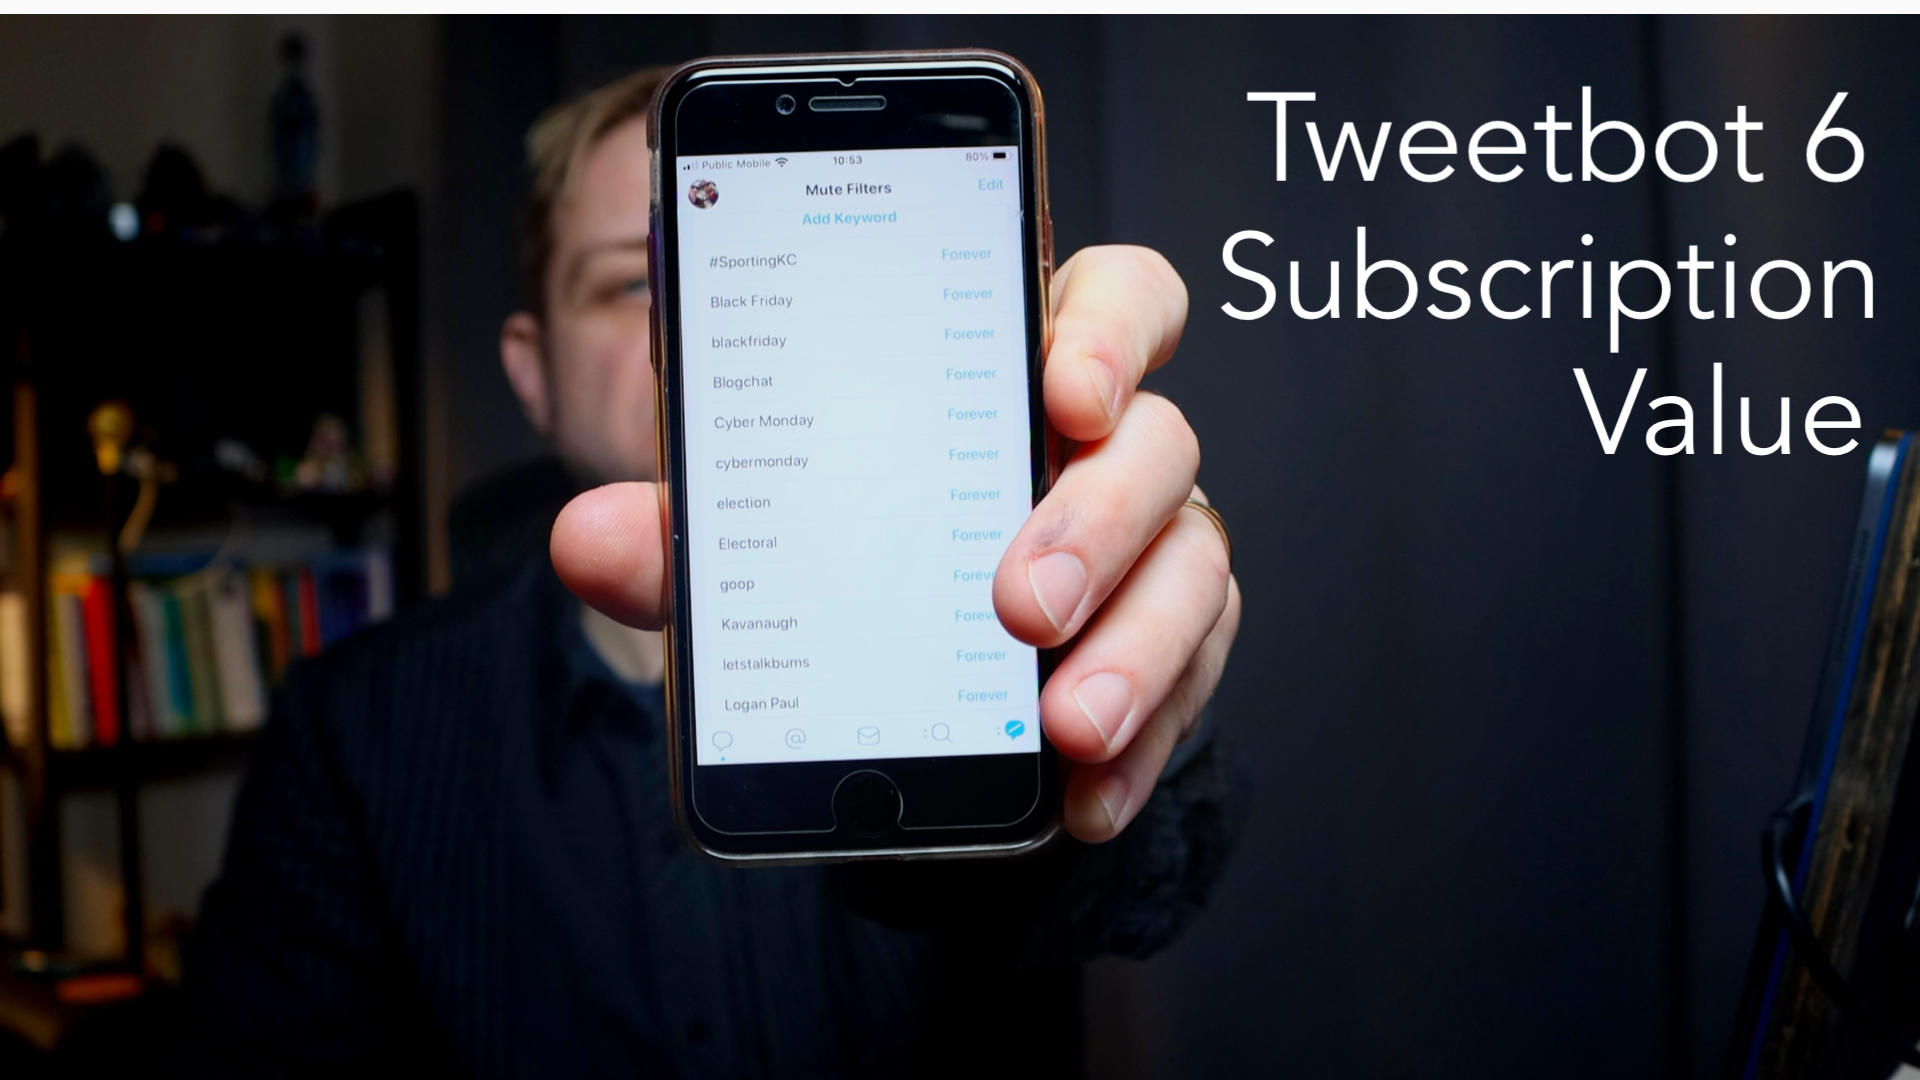 Why Tweetbot 6 is Worth the Subscription